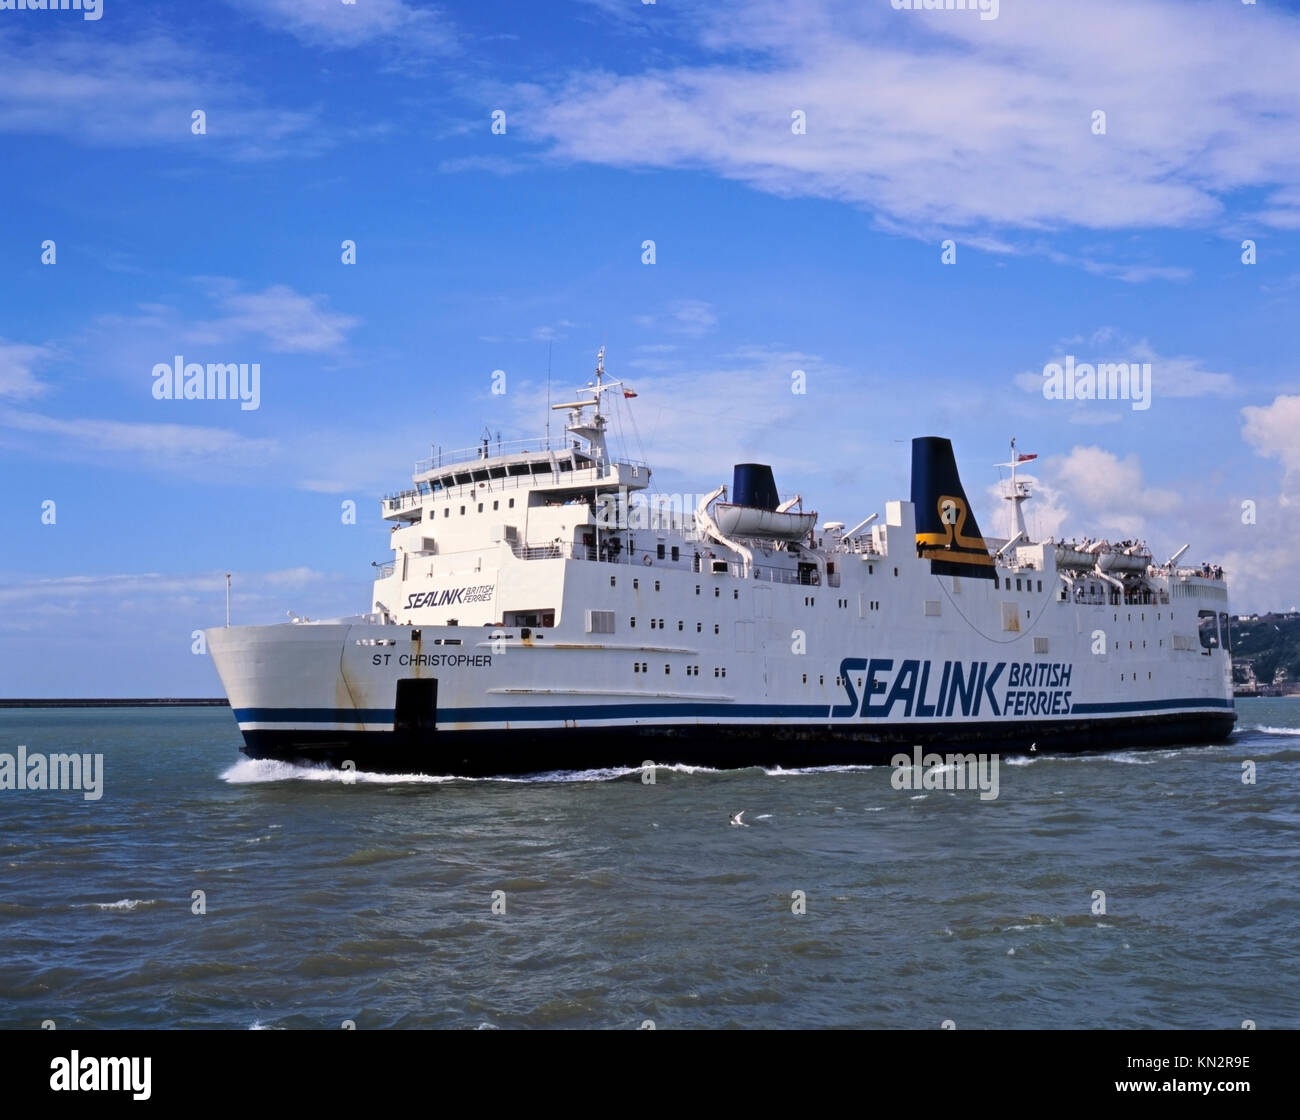 St. Christopher, Sealink British Ferries, Boats and Yachts, Dover Calais Crossing, Dover, Kent, England, United Kingdom Stock Photo